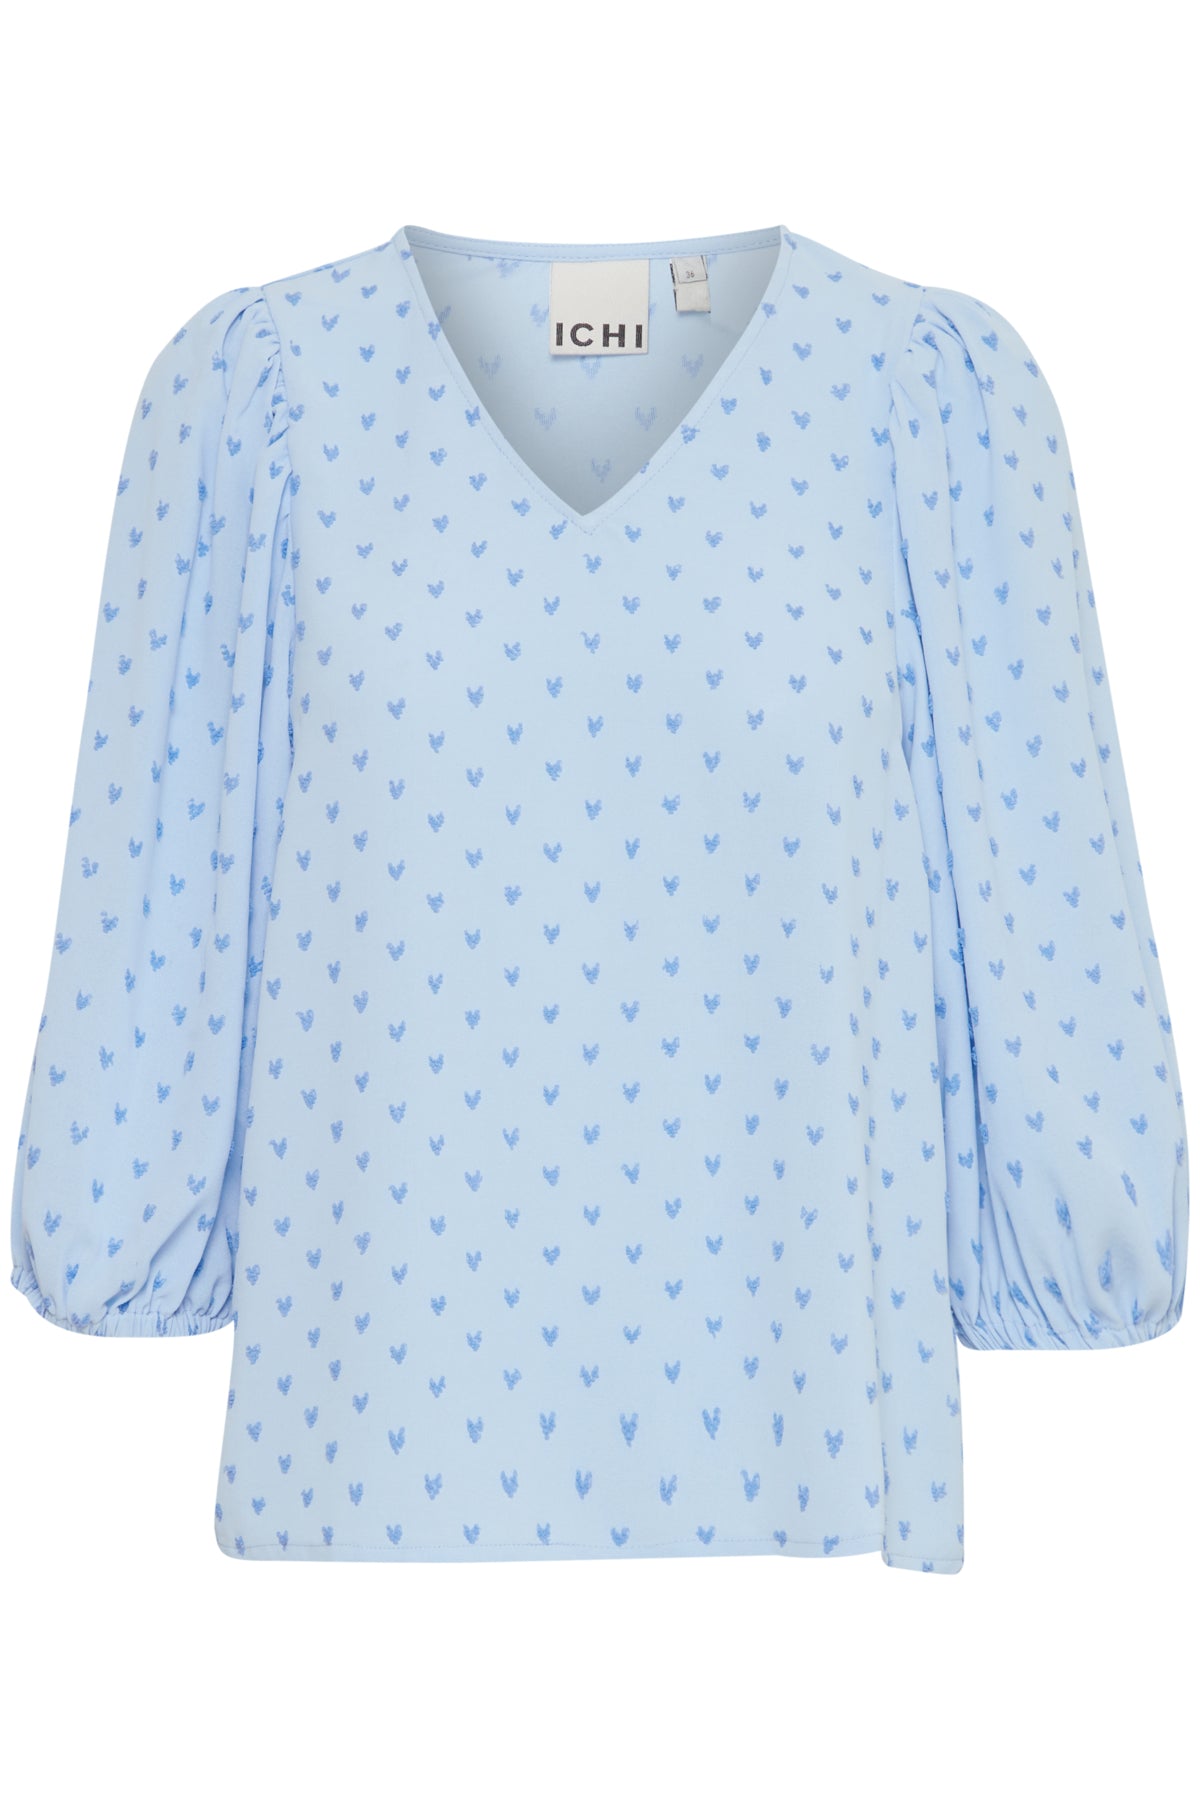 Sabella Blouse in Chambray Blue